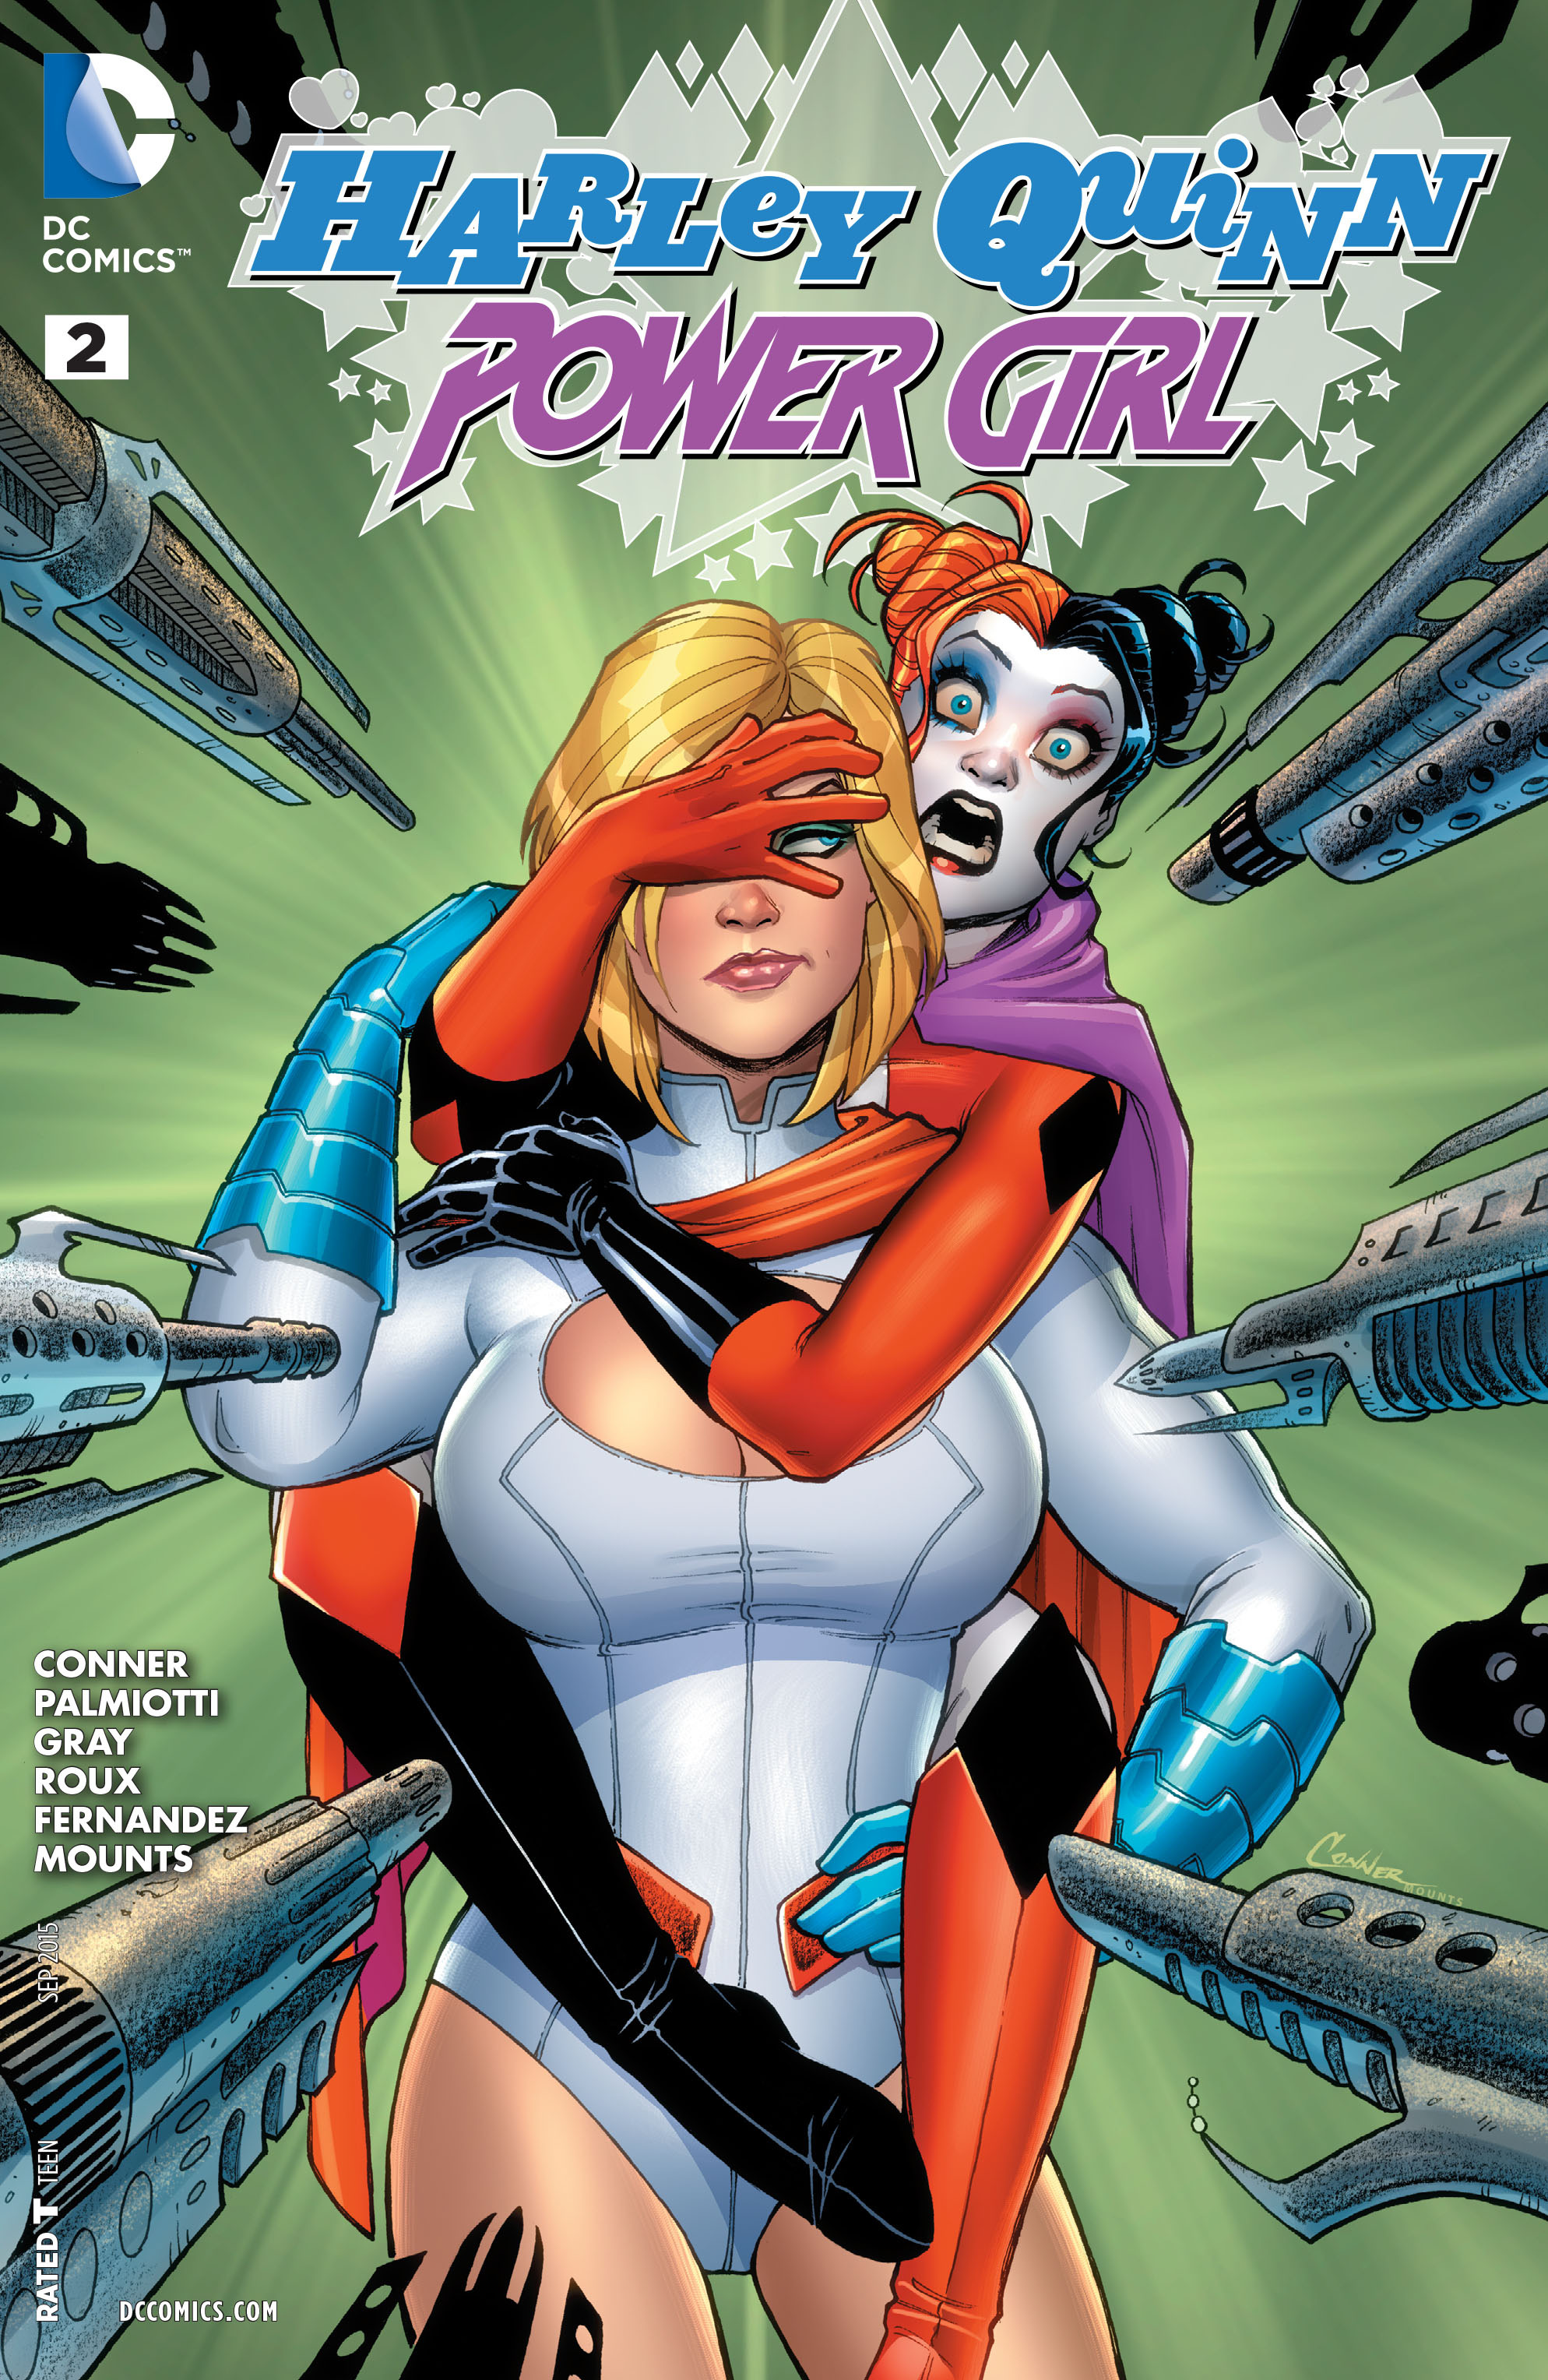 1988px x 3056px - Harley Quinn And Power Girl | Read Harley Quinn And Power Girl comic online  in high quality. Read Full Comic online for free - Read comics online in  high quality .